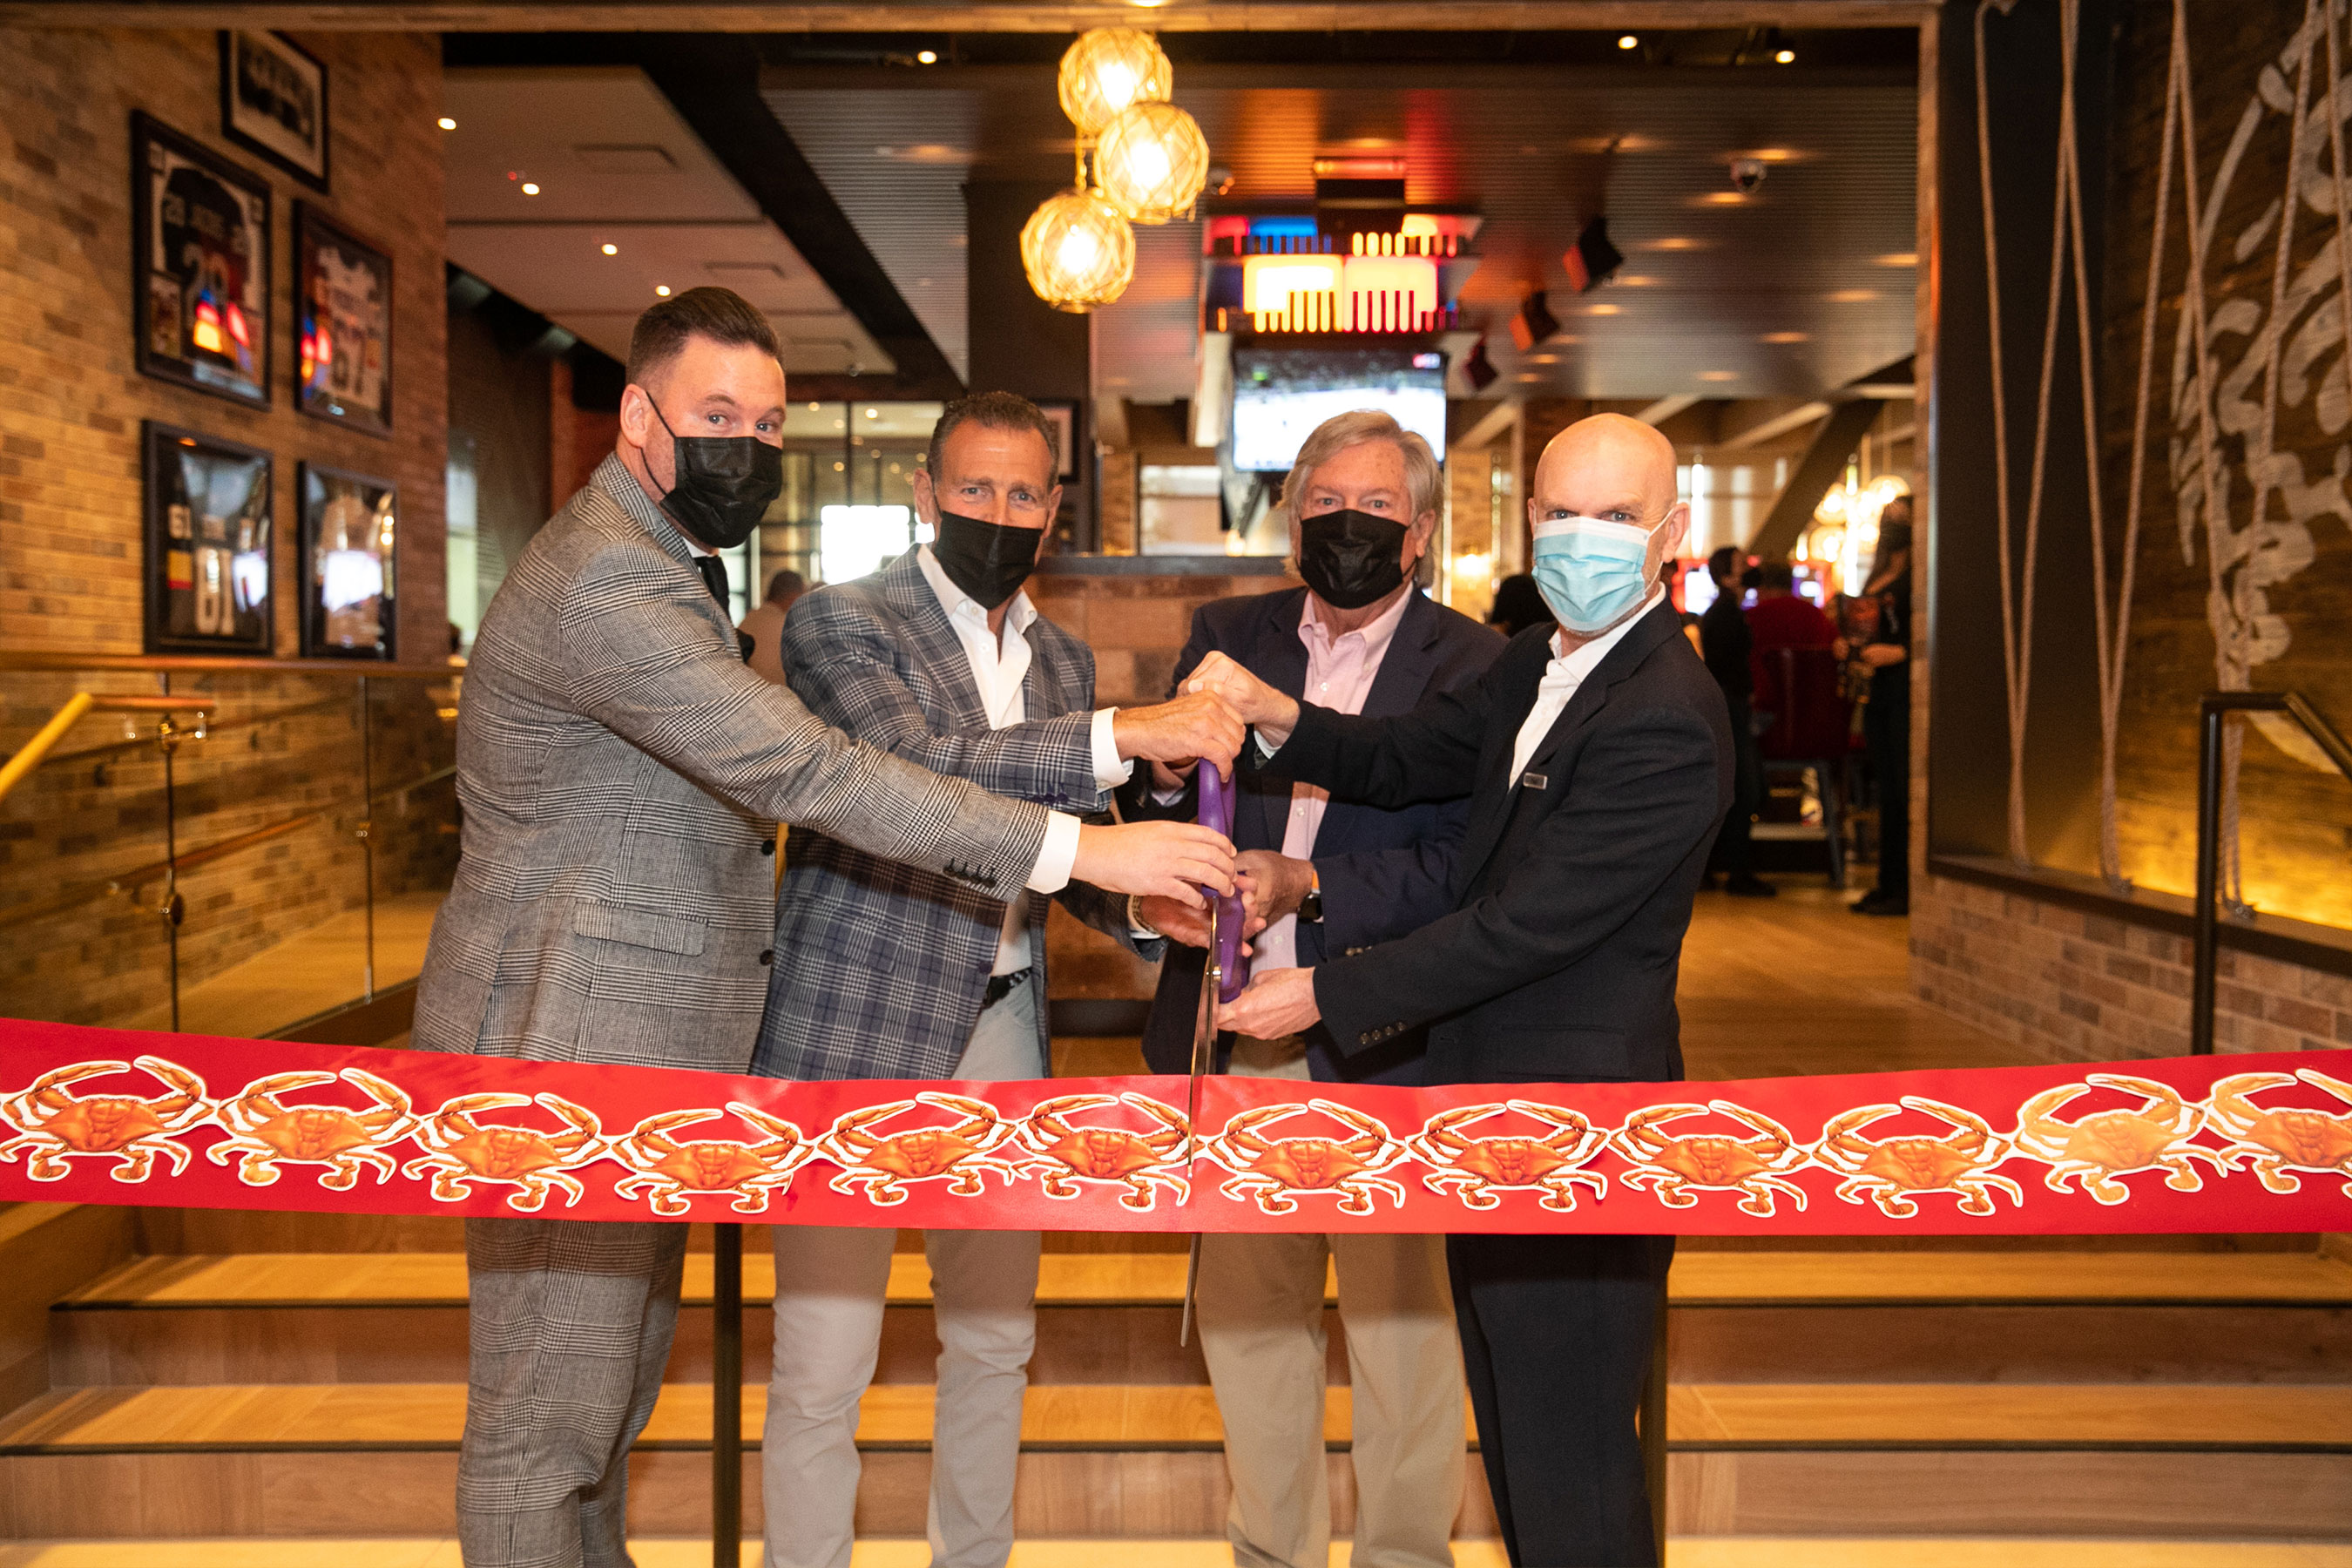 (L-R) Anthony Olheiser, Pete Ciarrocchi, Clark County Commissioner Tick Segerblom, and Paul Hobson cut the ribbon at the grand opening celebration of Chickie’s & Pete’s Crab House and Sports Bar inside SAHARA Las Vegas